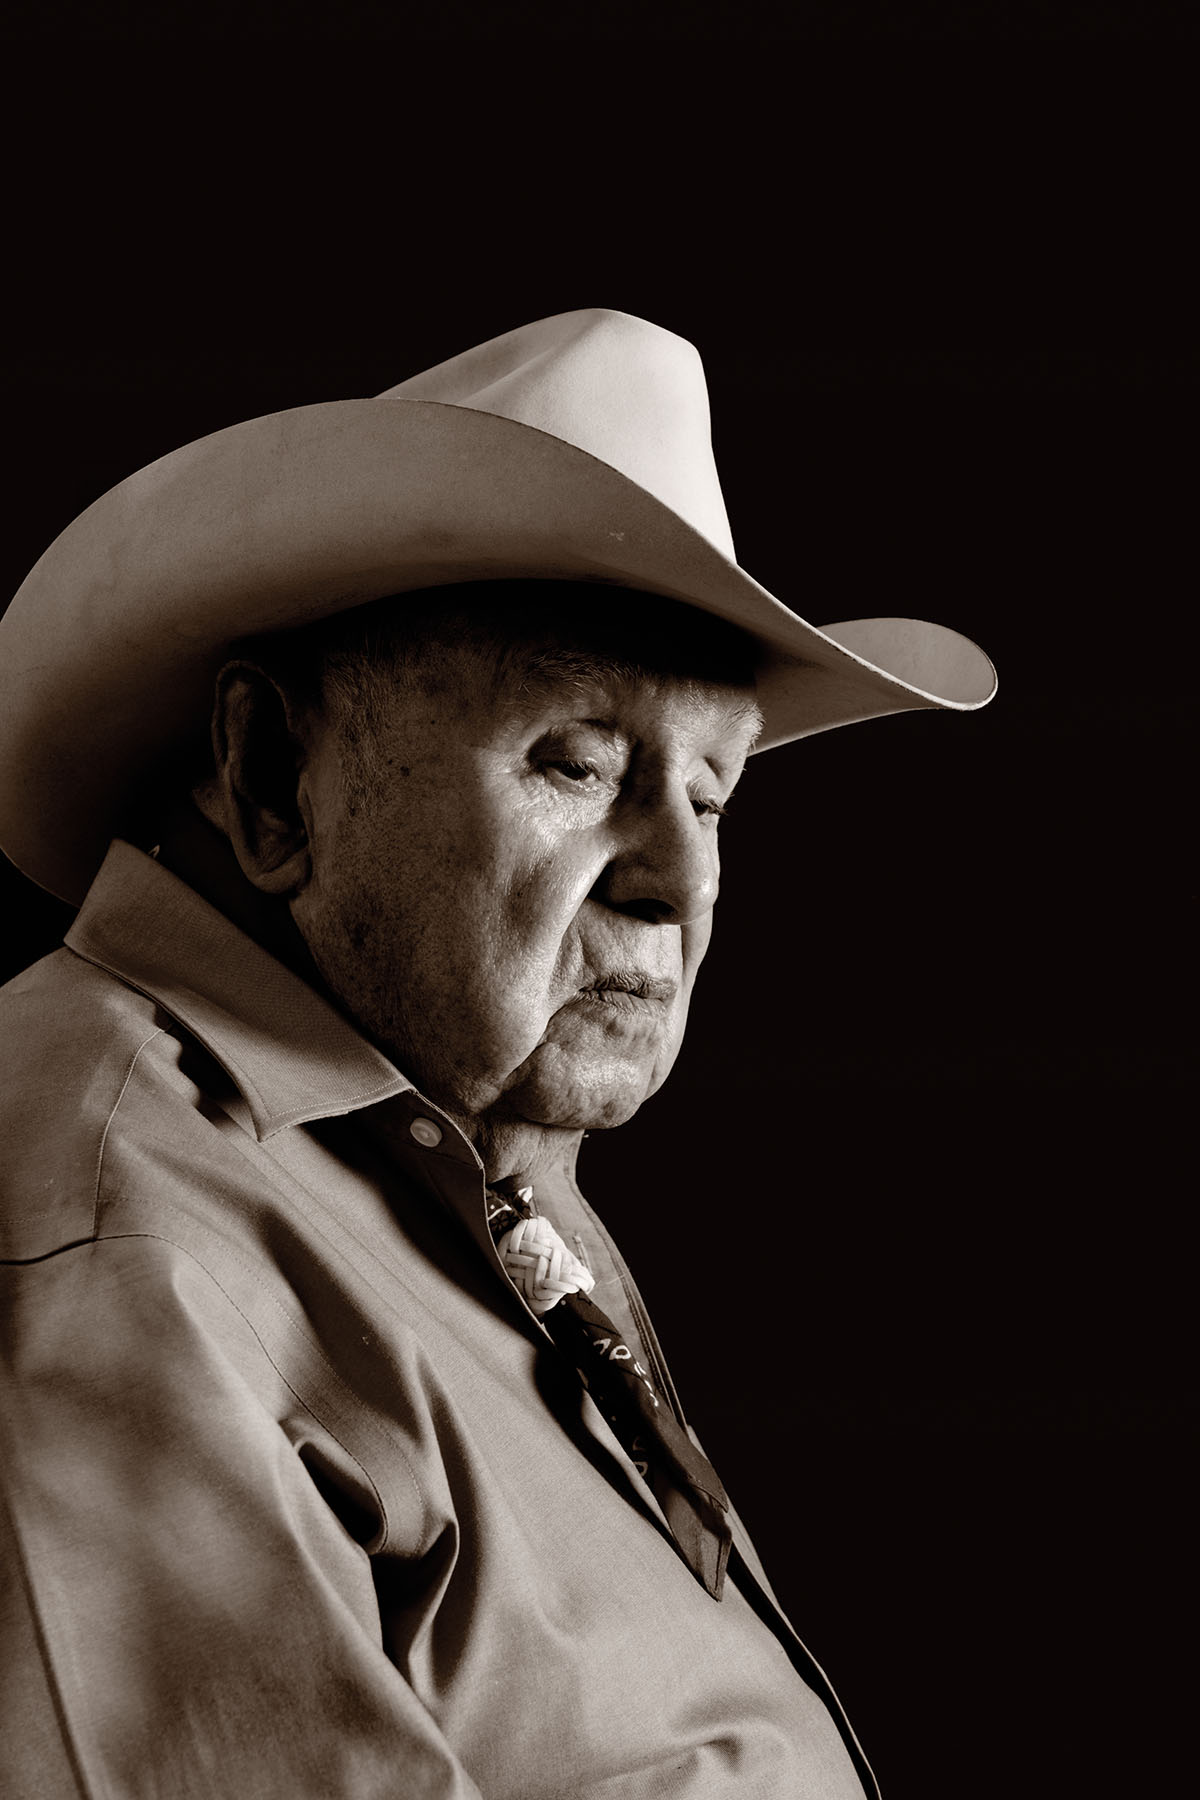 An older man in a cowboy hat looks somber